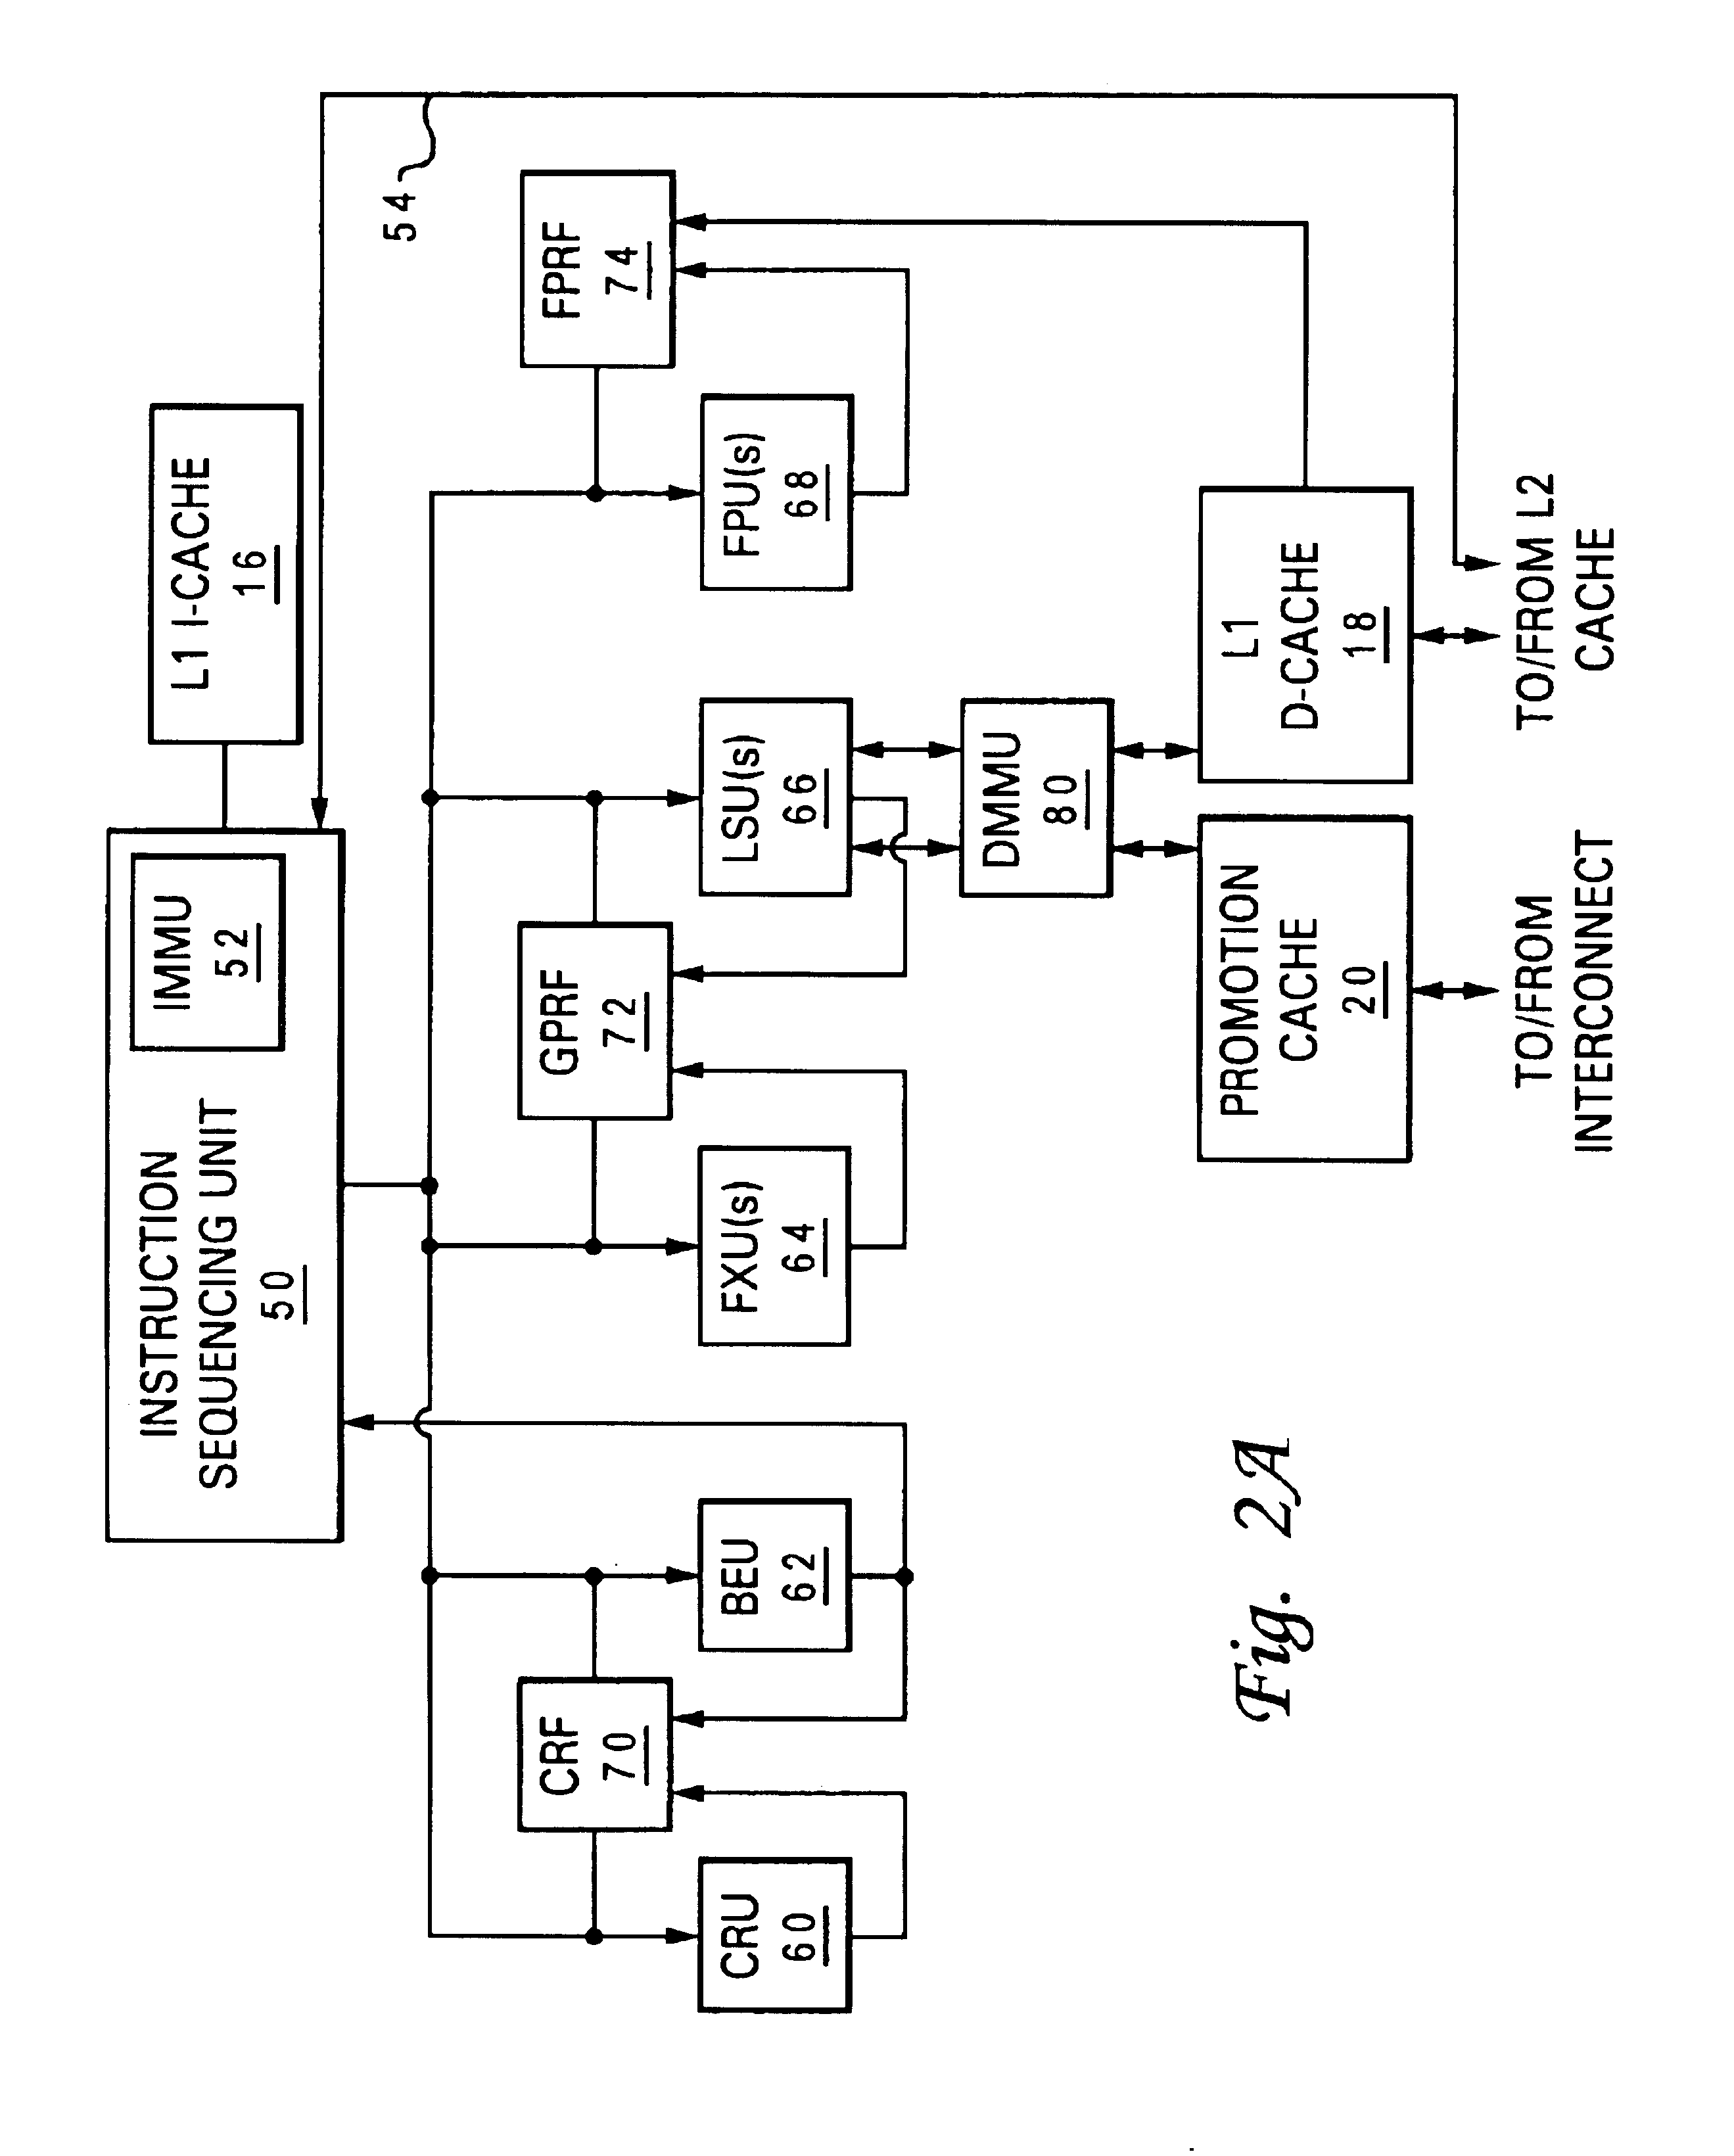 Method, apparatus and system for acquiring a global promotion facility utilizing a data-less transaction